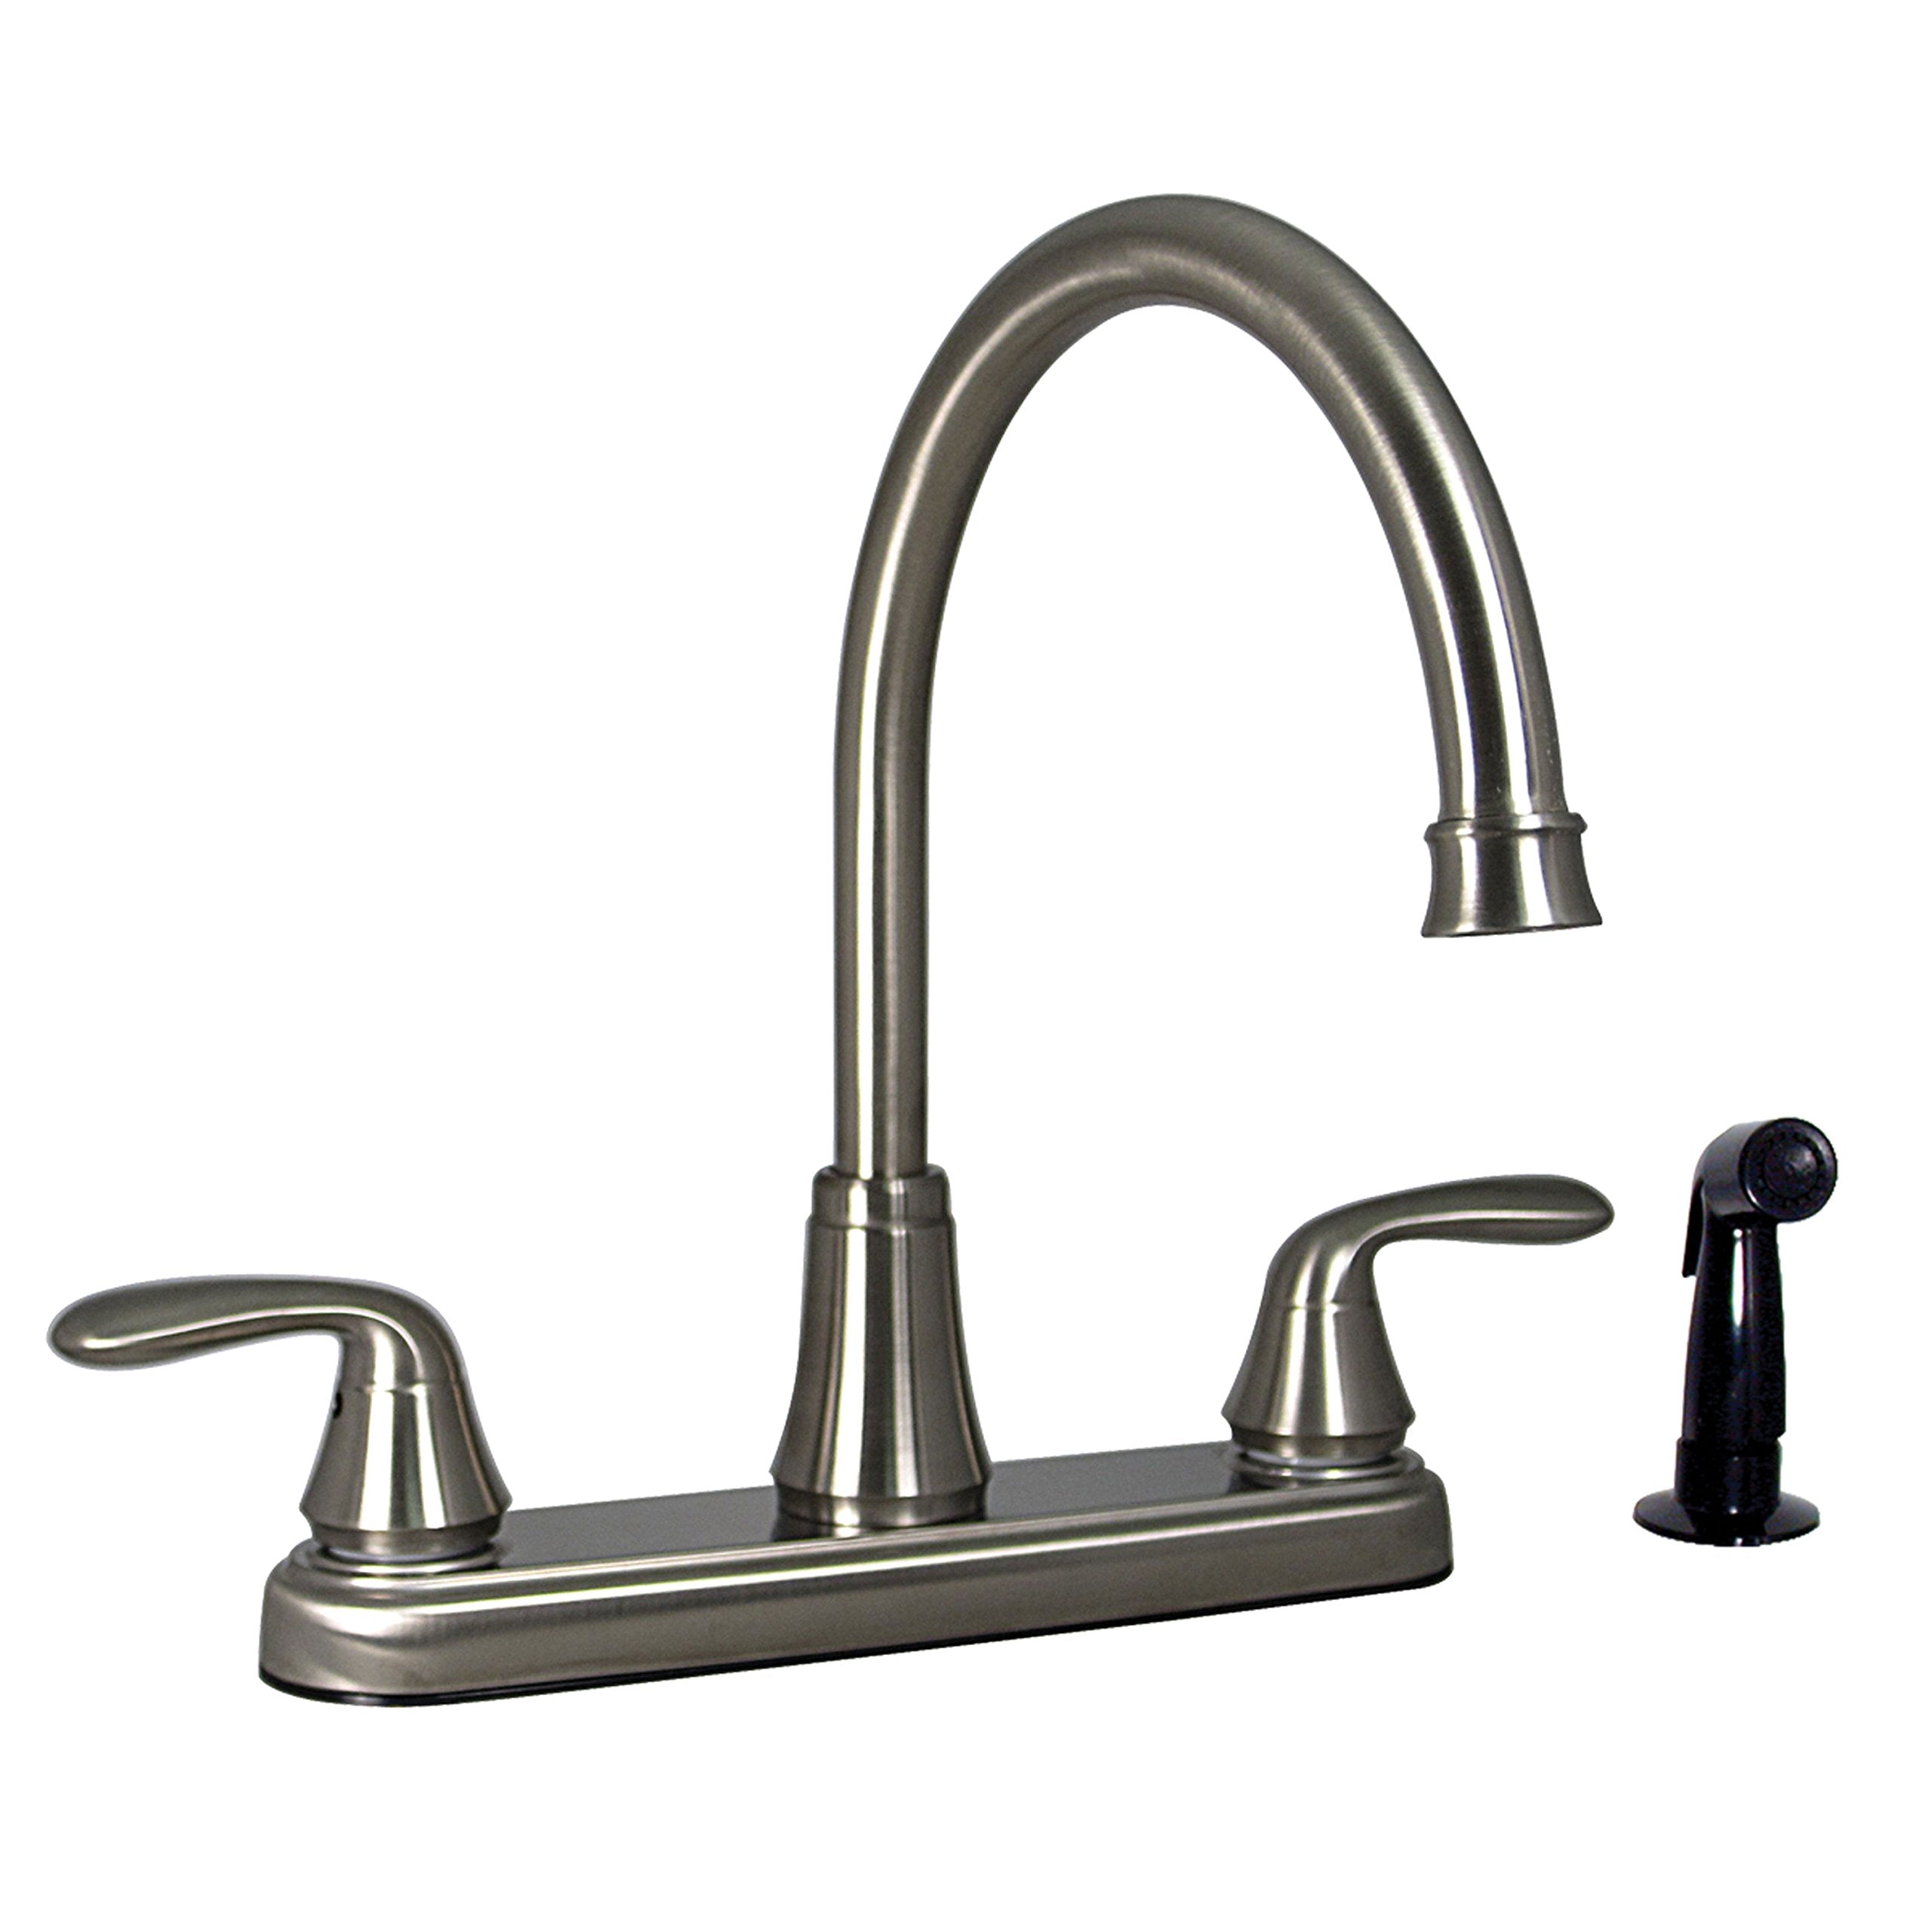 Phoenix PF231401 Two-Handle Kitchen High-Arc Faucet, Brushed Nickel with Side Sprayer